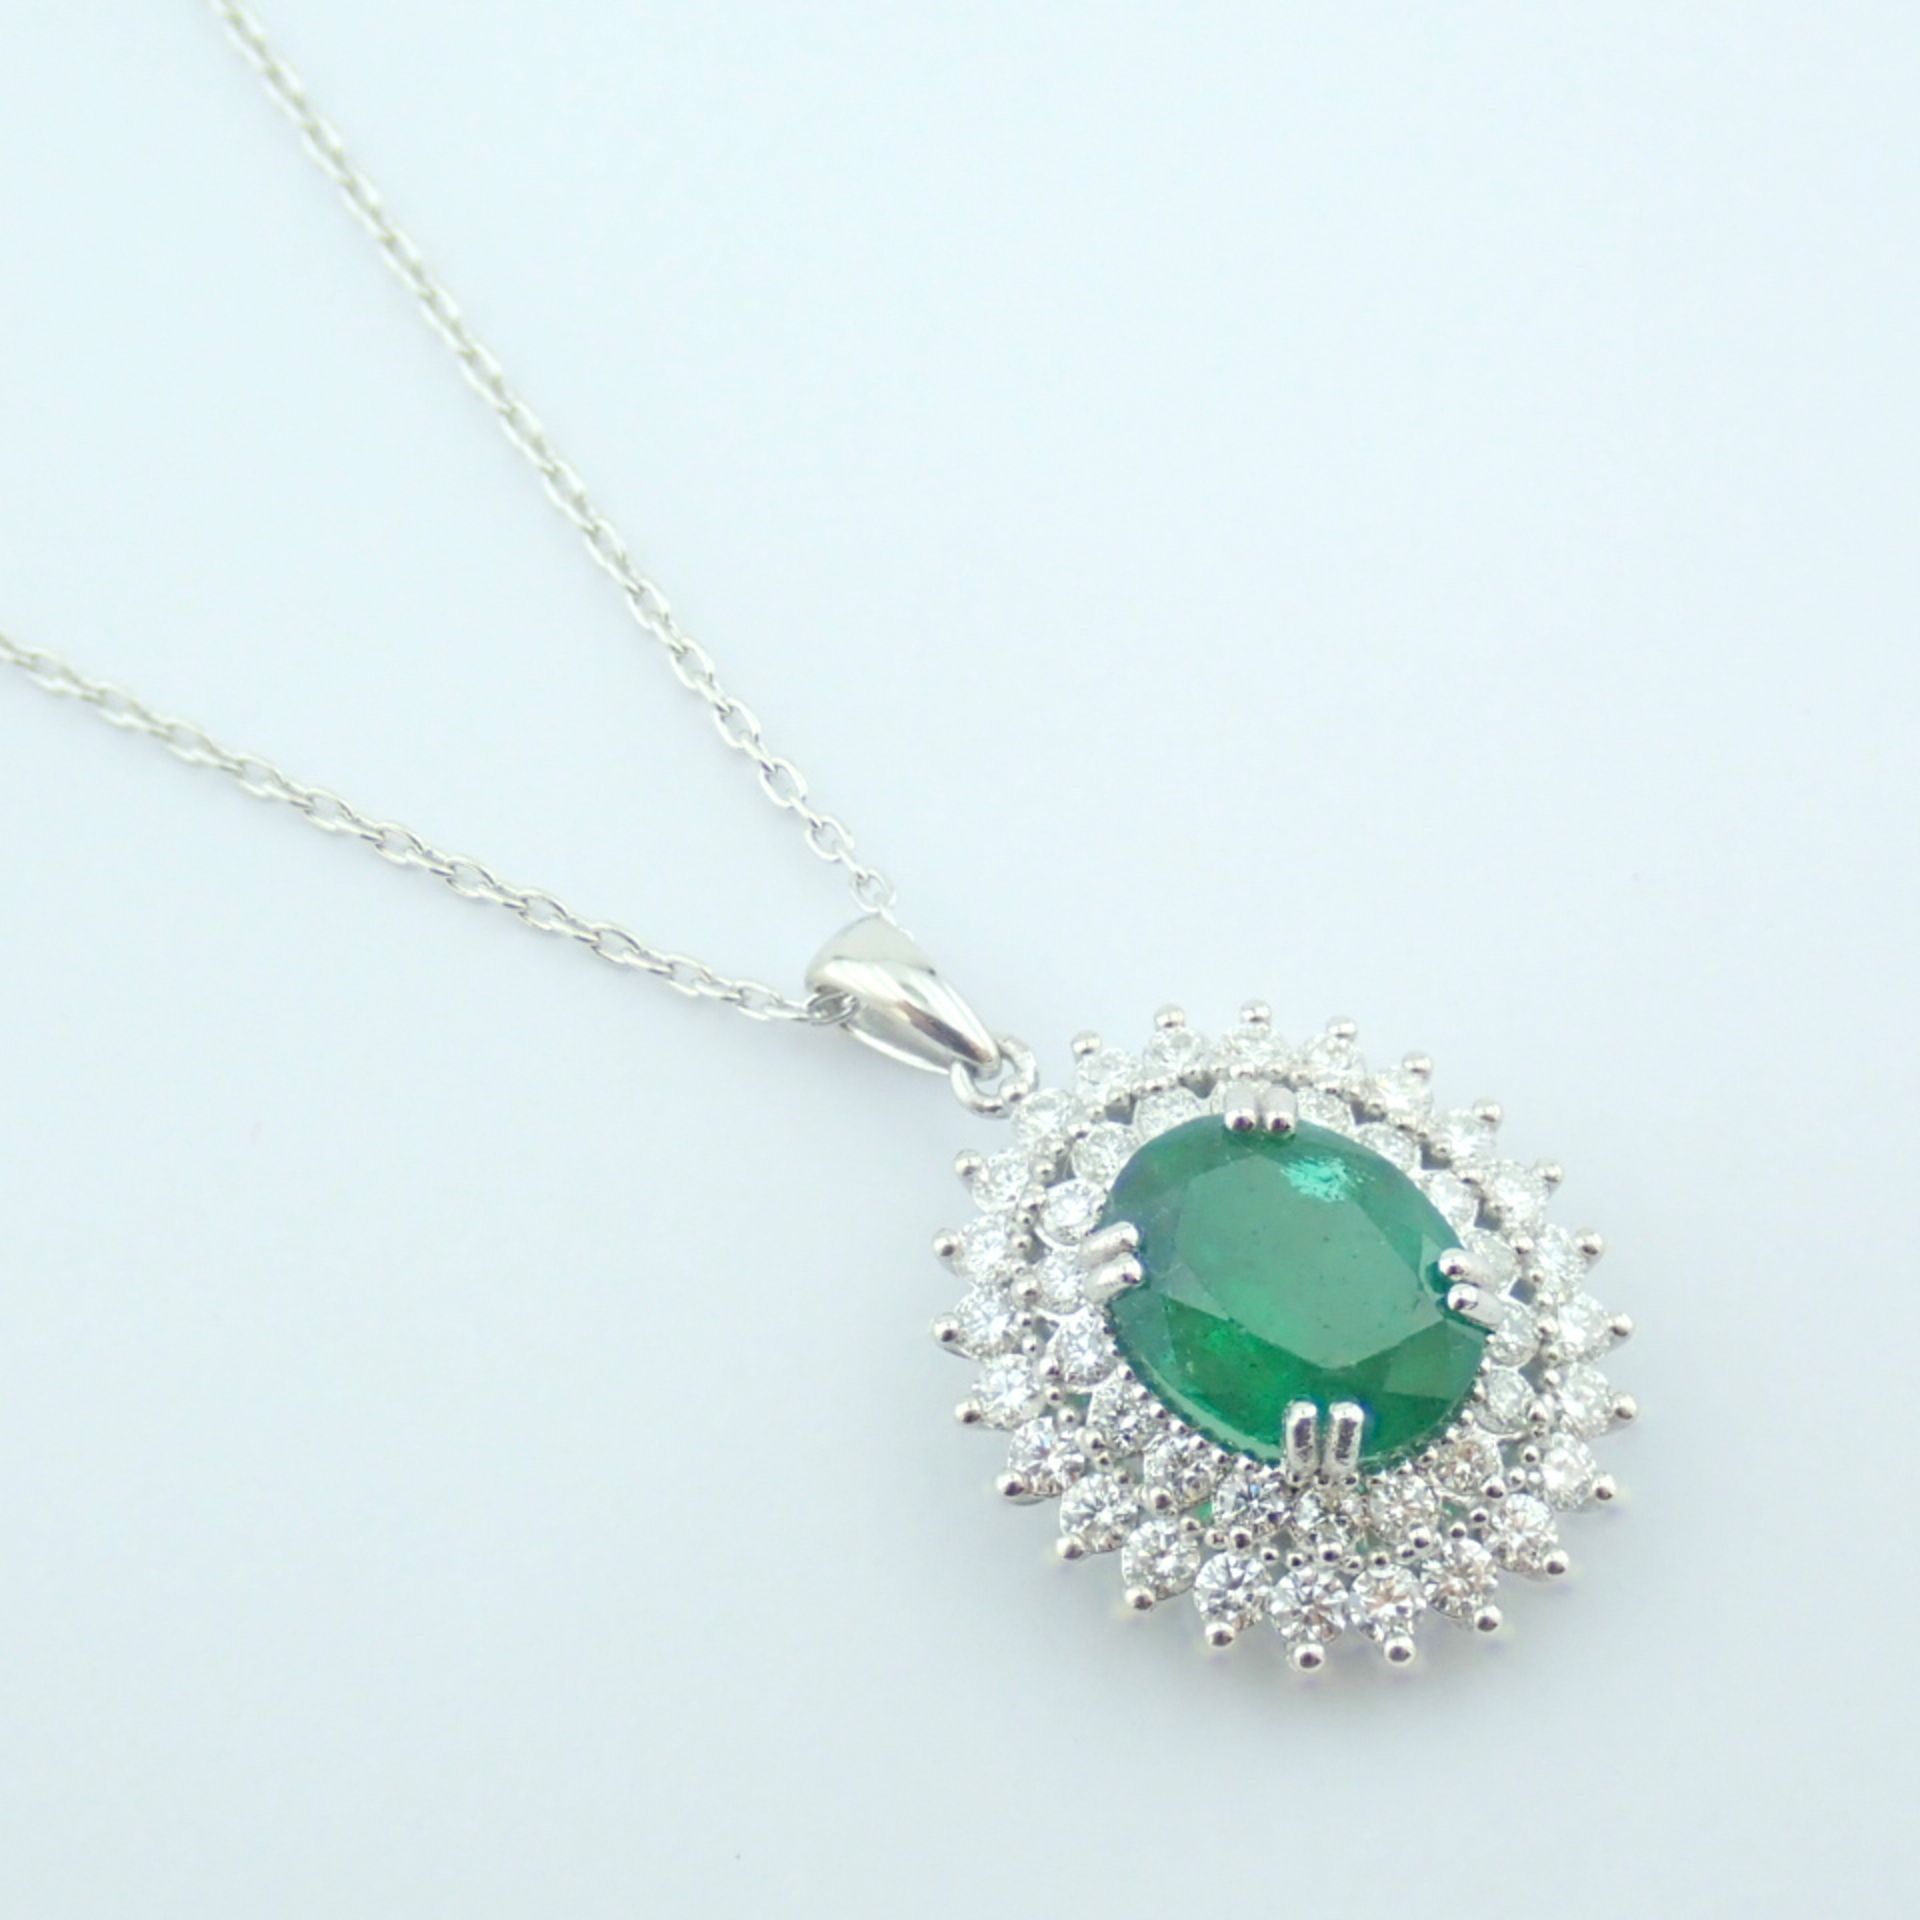 Certificated 14K White Gold Diamond & Emerald Necklace - Image 8 of 11